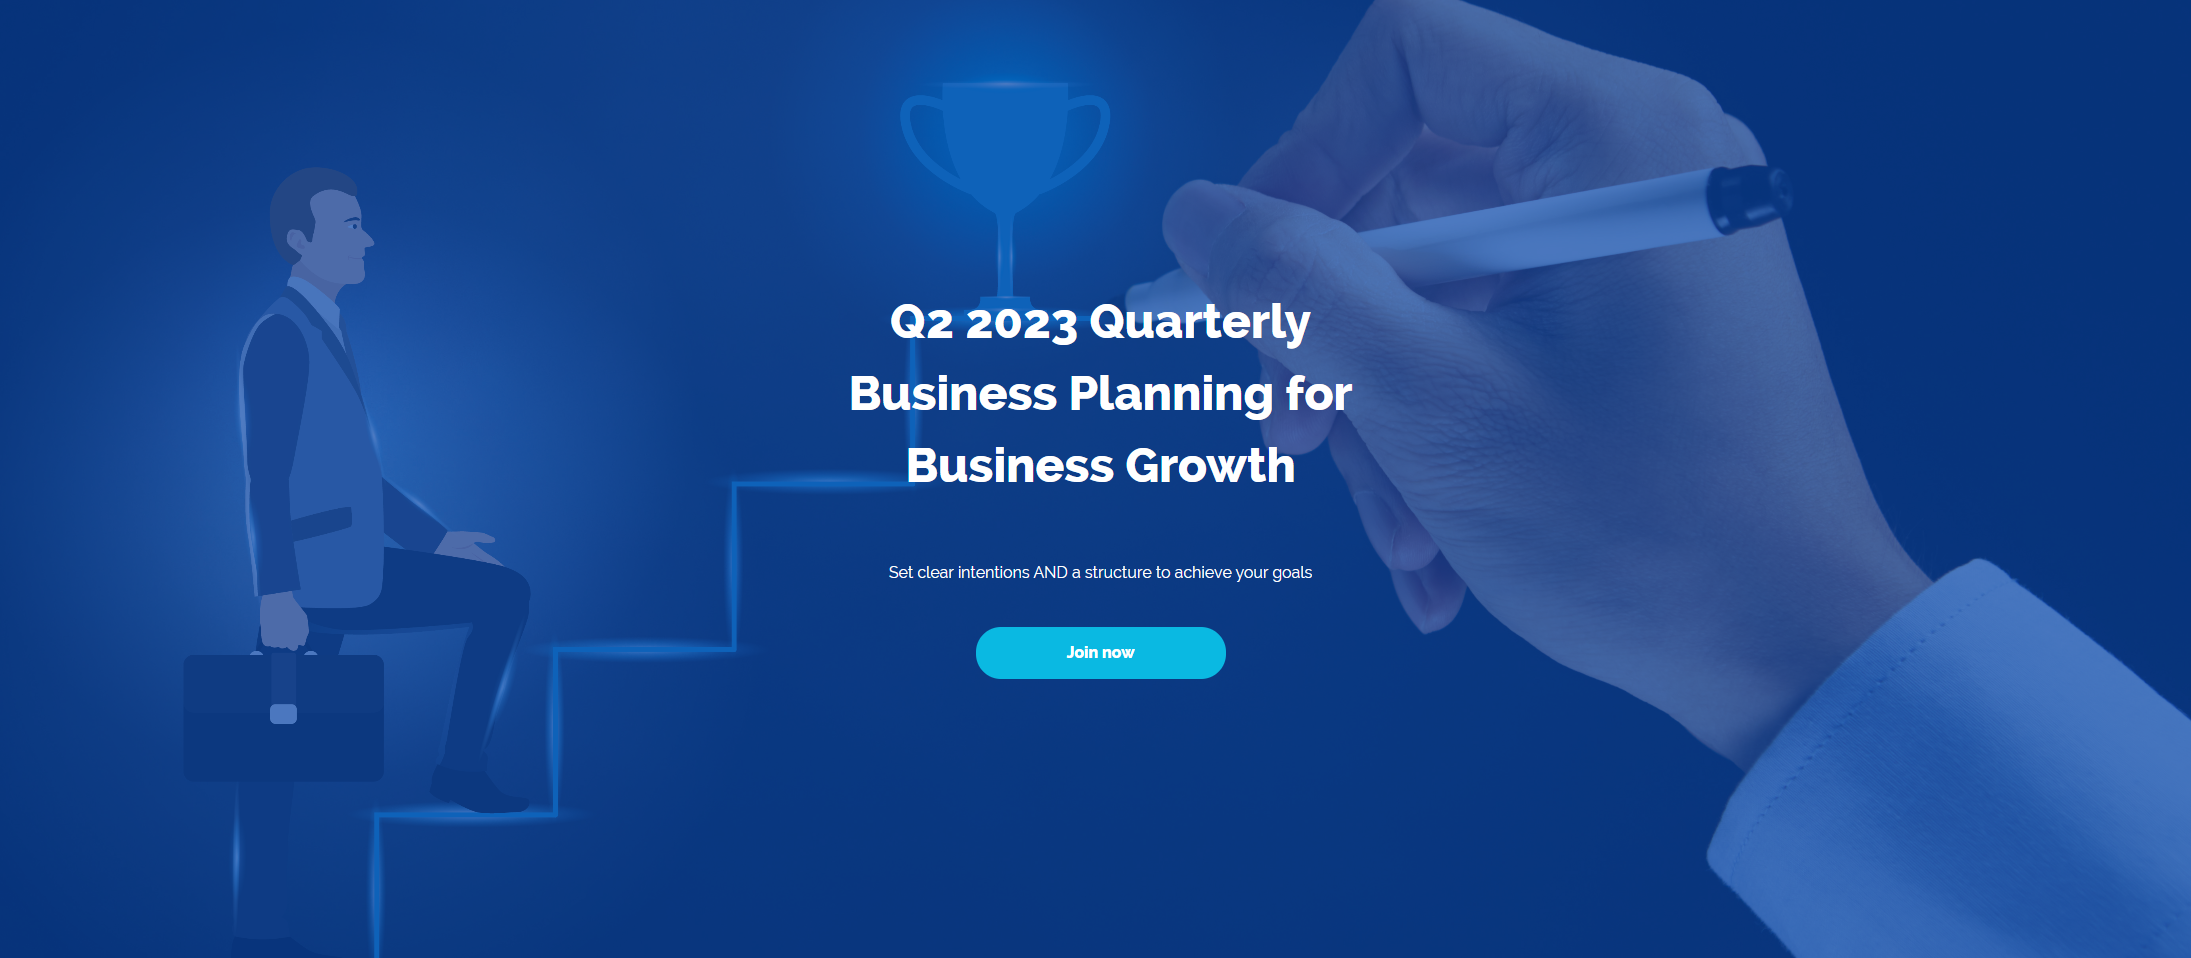 Quarterly planning for business growth